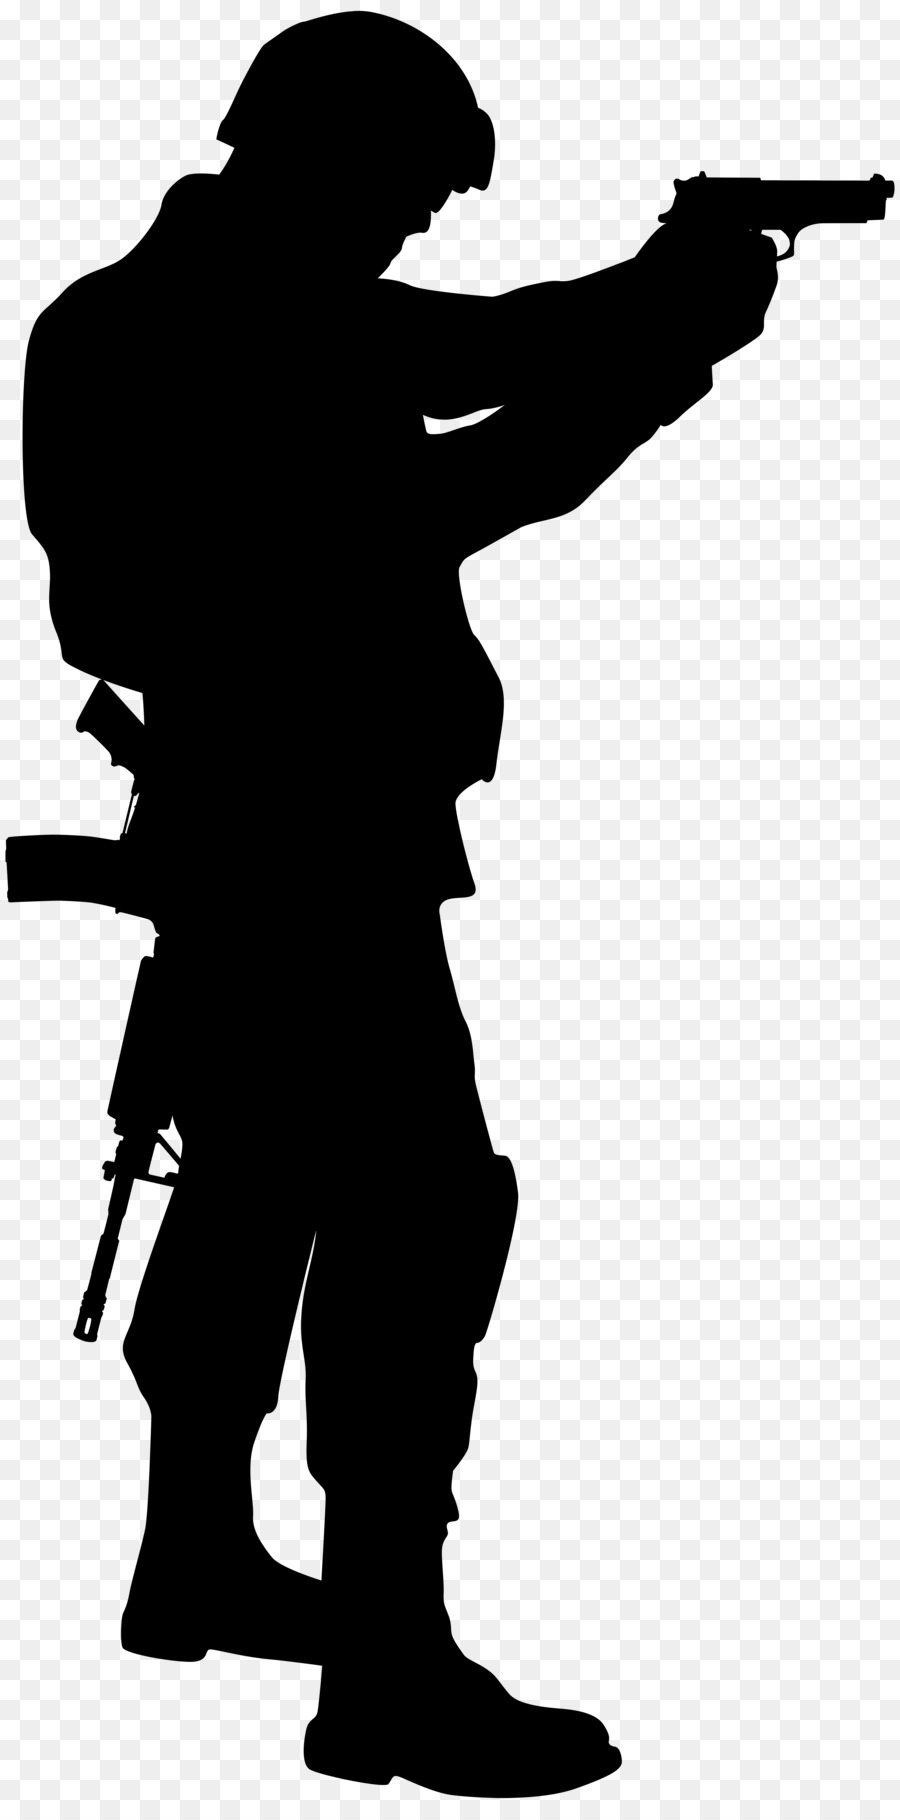 Soldier Silhouette Army Clip art - Soldier Silhouette Cliparts png download - 3981*8000 - Free Transparent Soldier png Download.